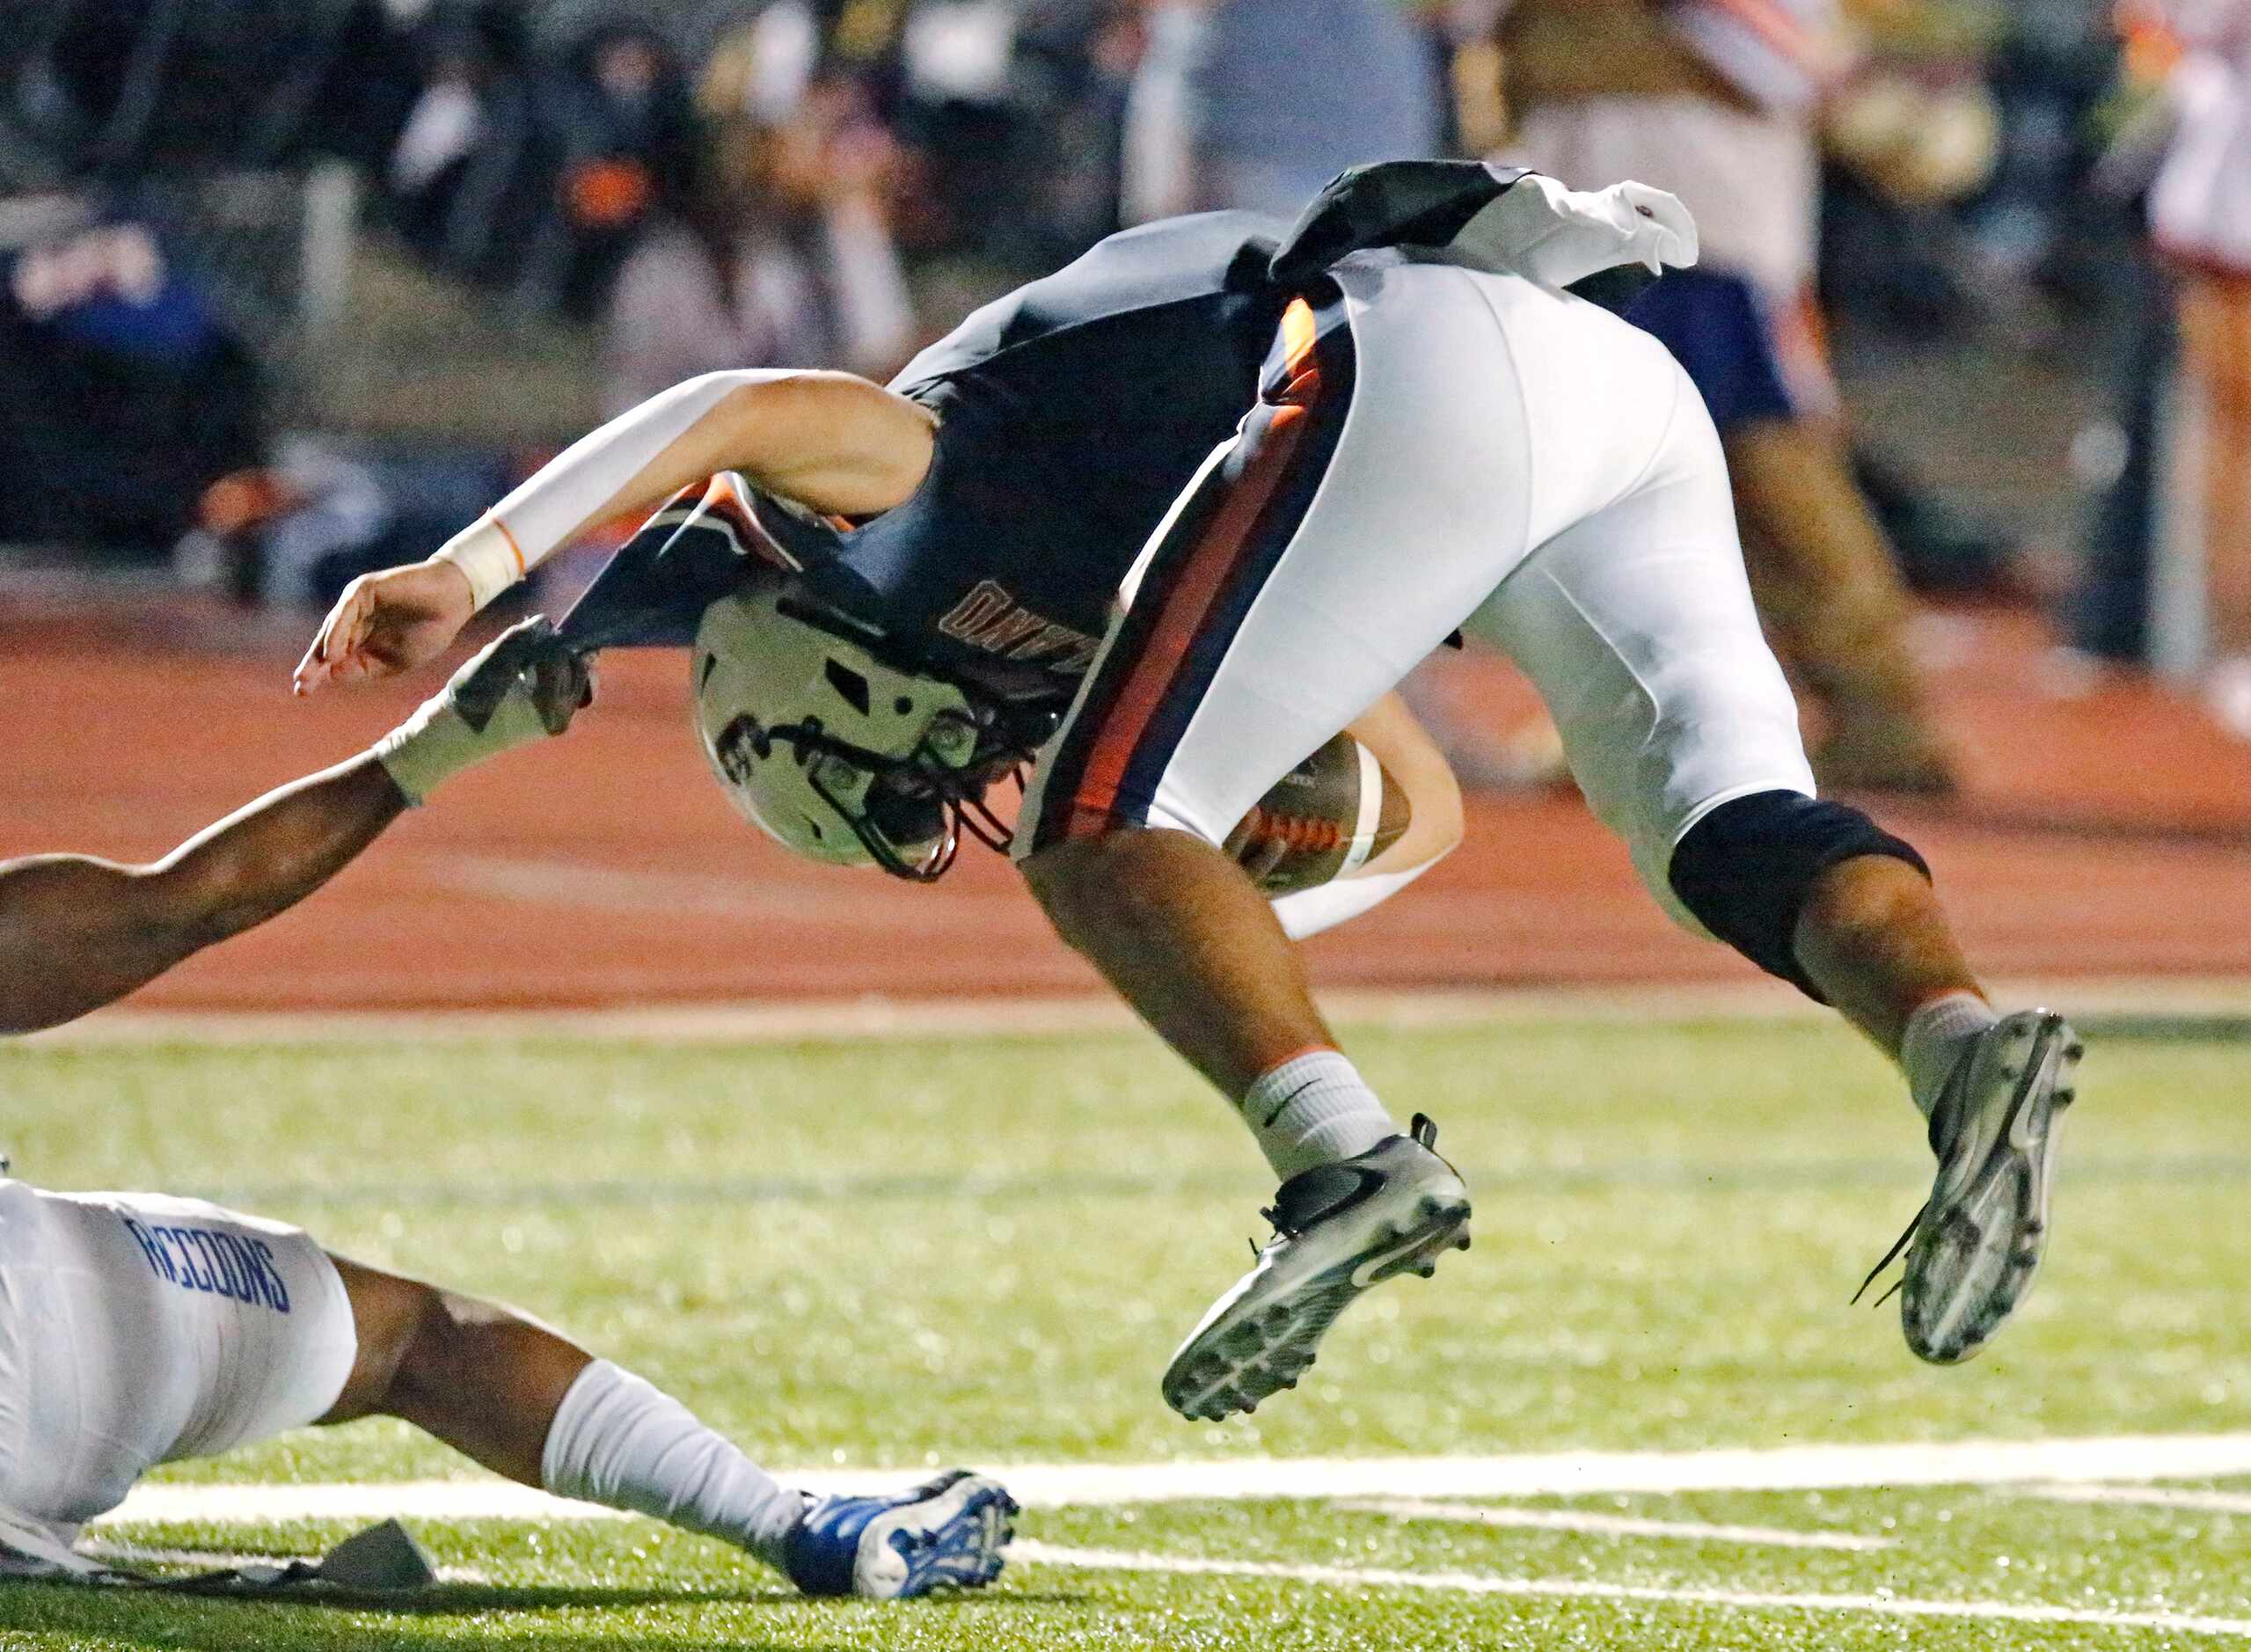 Wakeland High School quarterback Brennan Myer (9) is tossed out of bounds near the goal line...